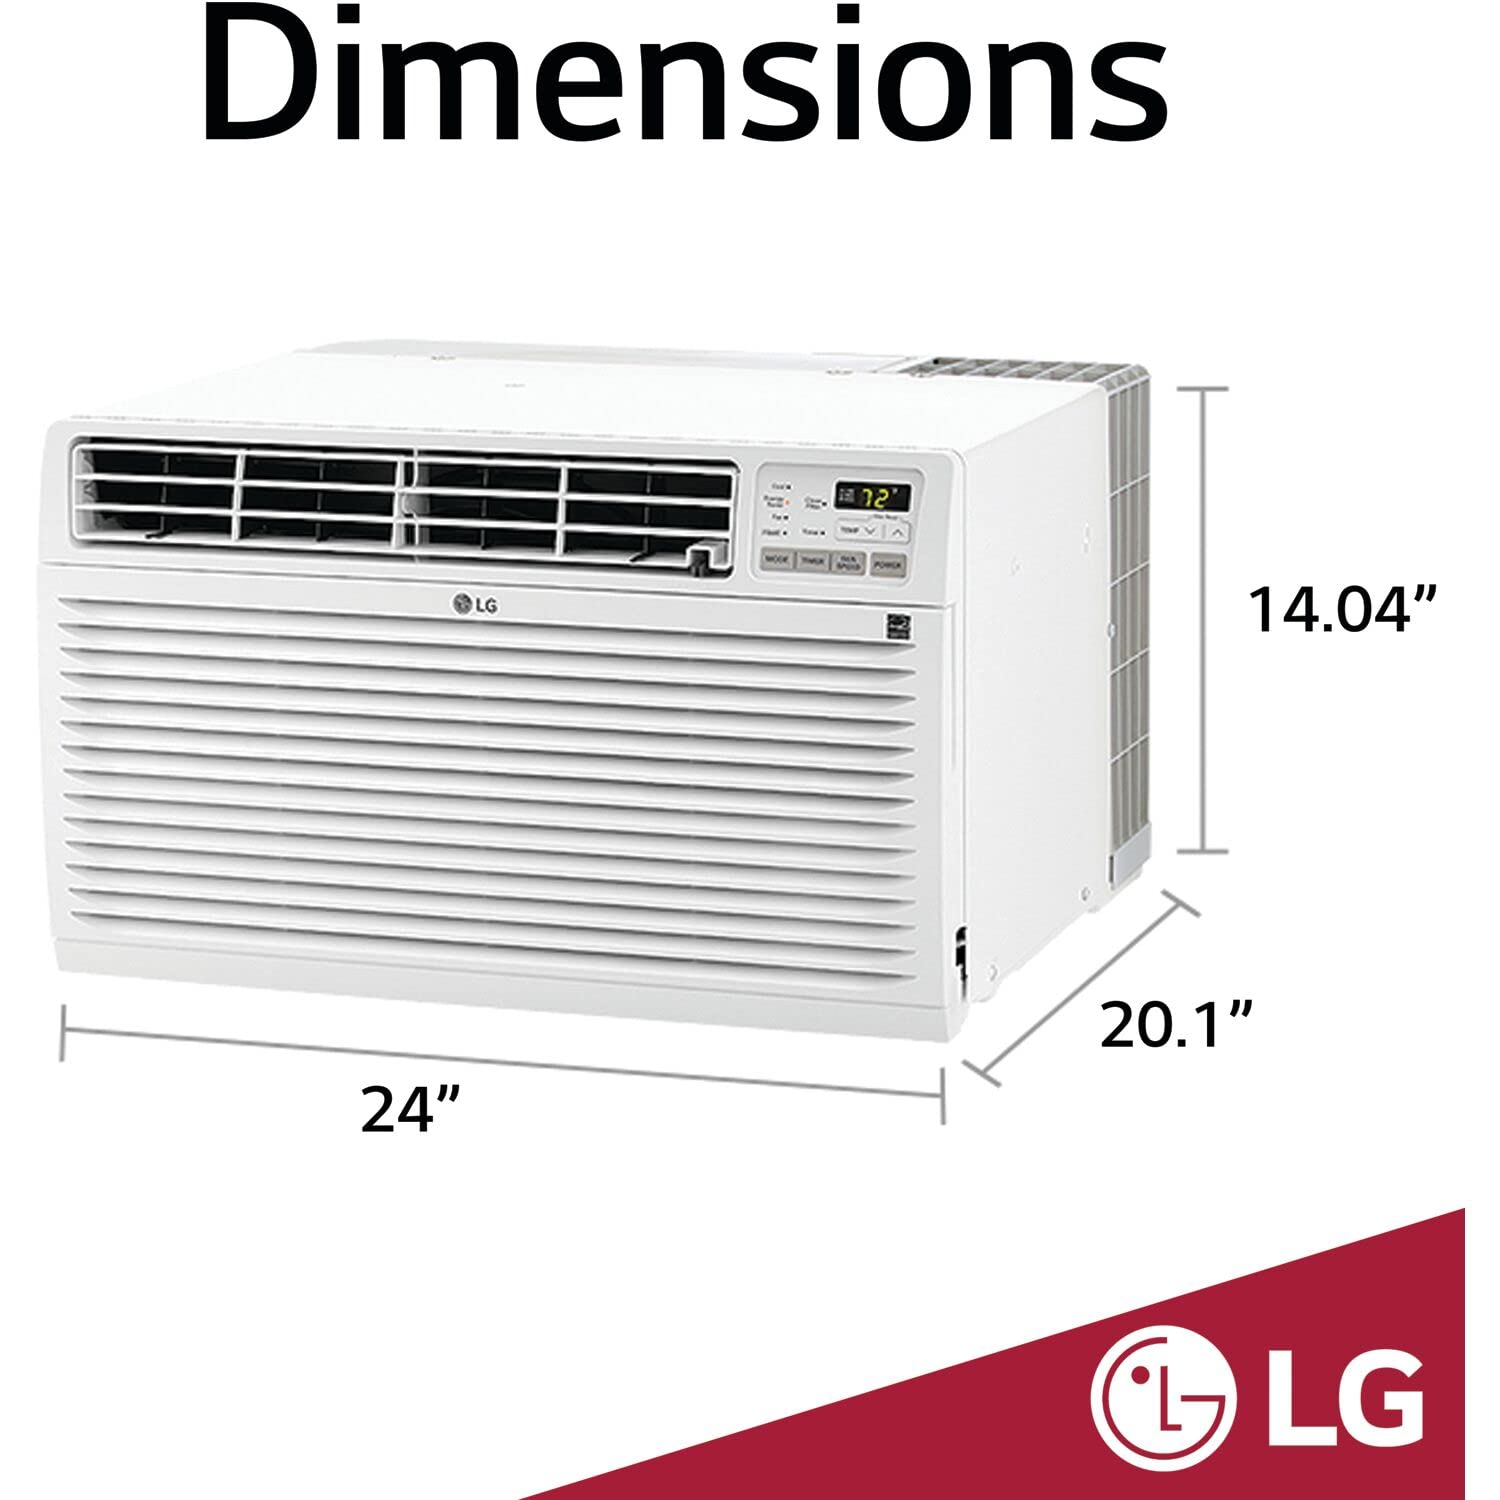 LG 11,800 BTU Through-the-Wall Air Conditioner with Remote, Cools up to 530 Sq. Ft., ENERGY STAR®, 3 Cool & Fan Speeds, Universal design fits most sleeves, 115V